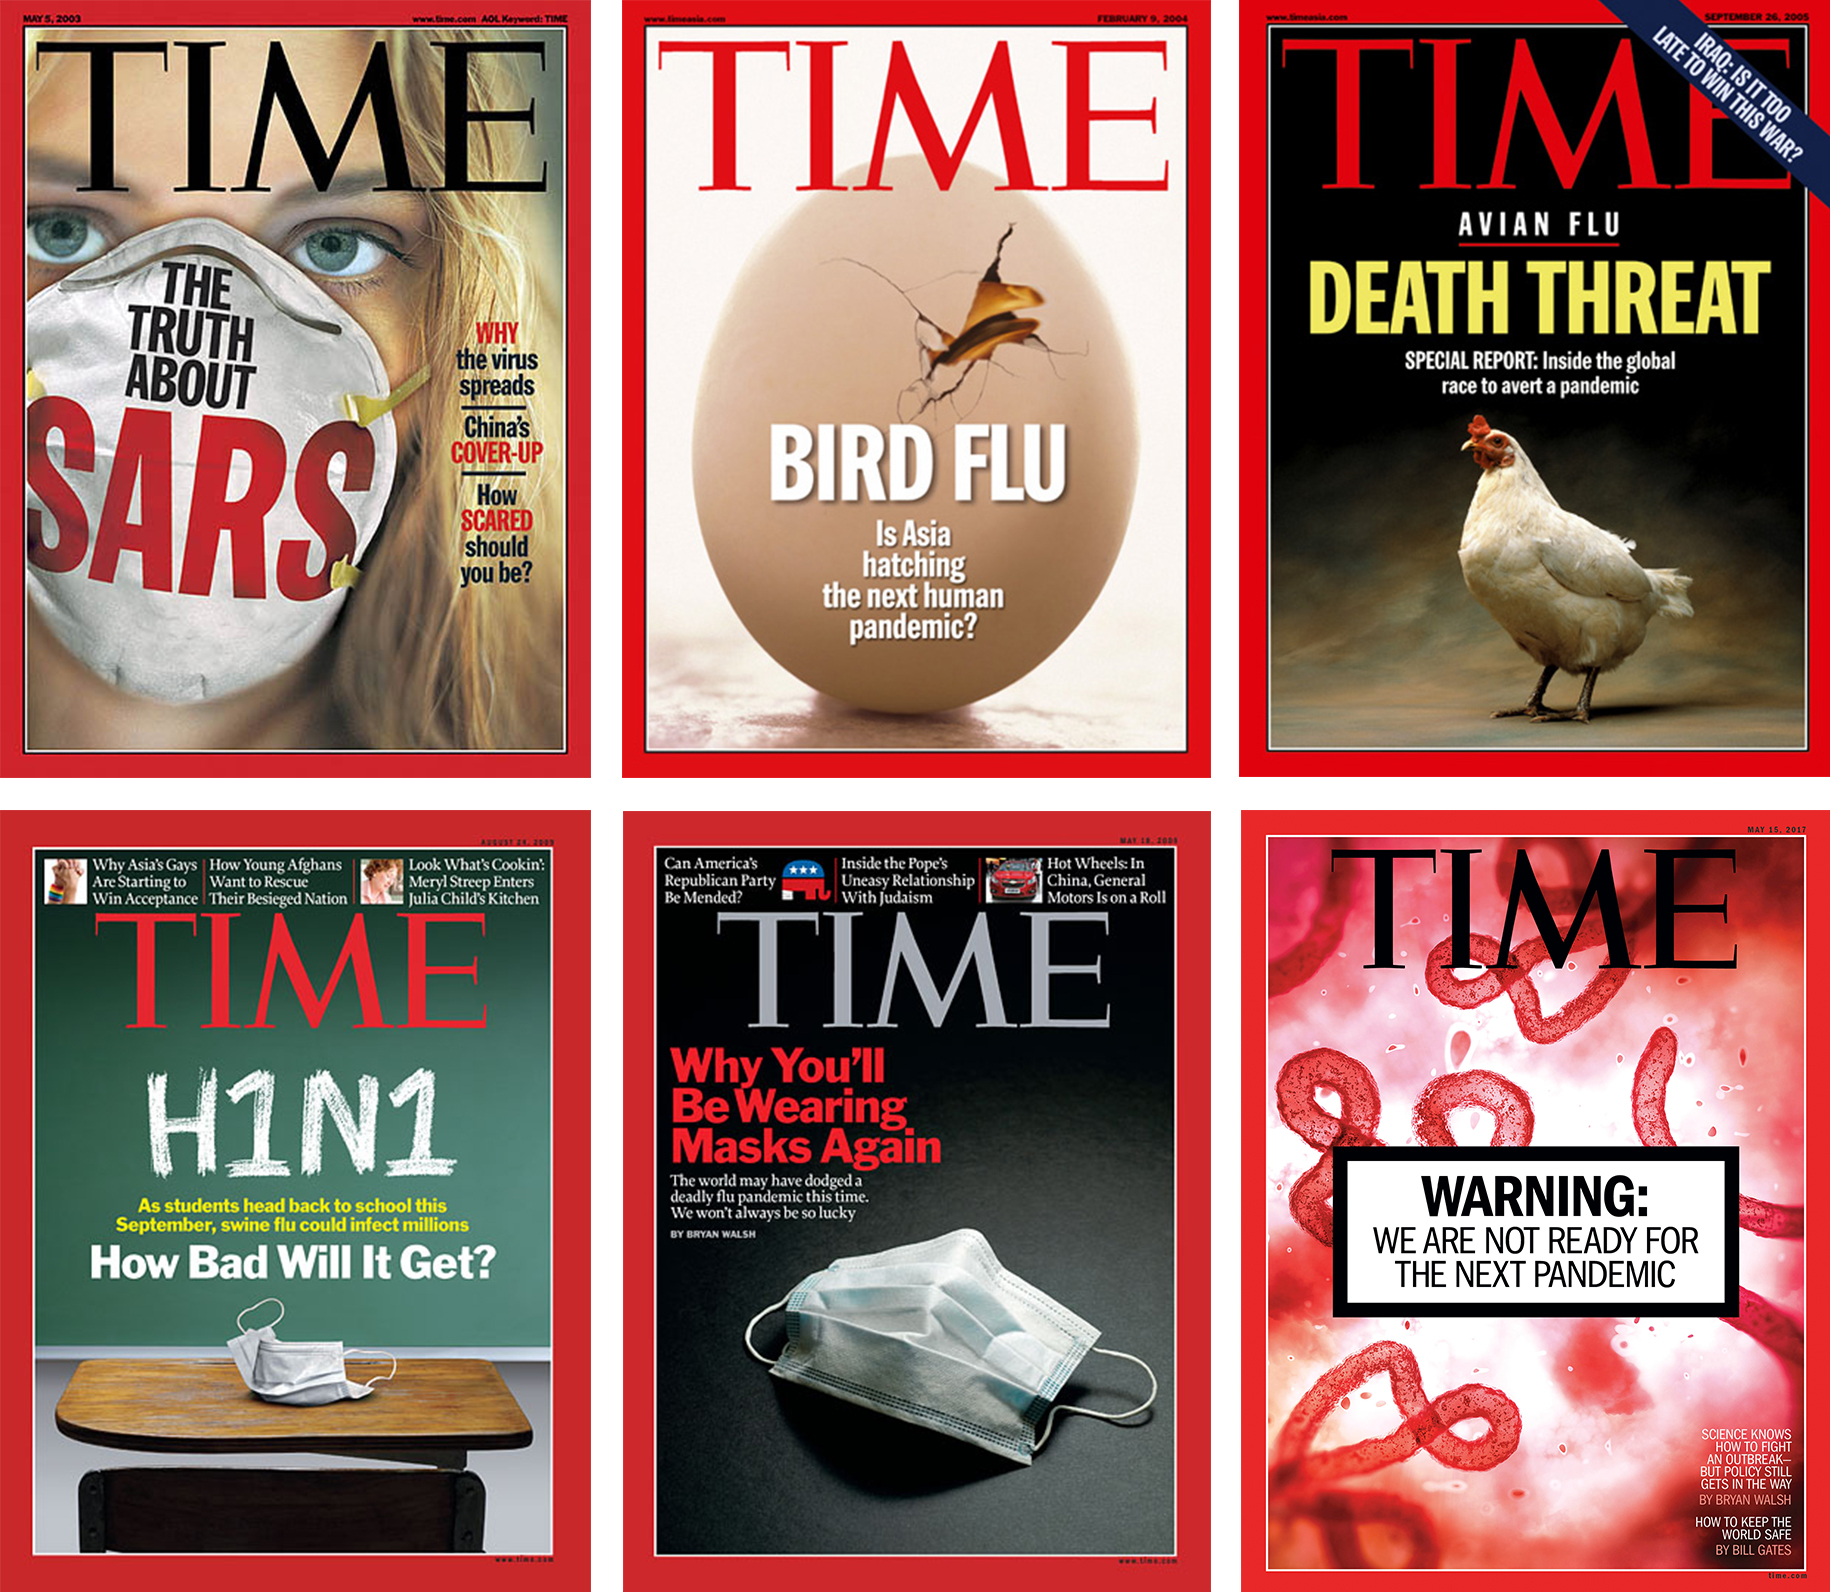 TIME covers from 2003, 2004, 2005, 2007, 2009, and 2017, in order